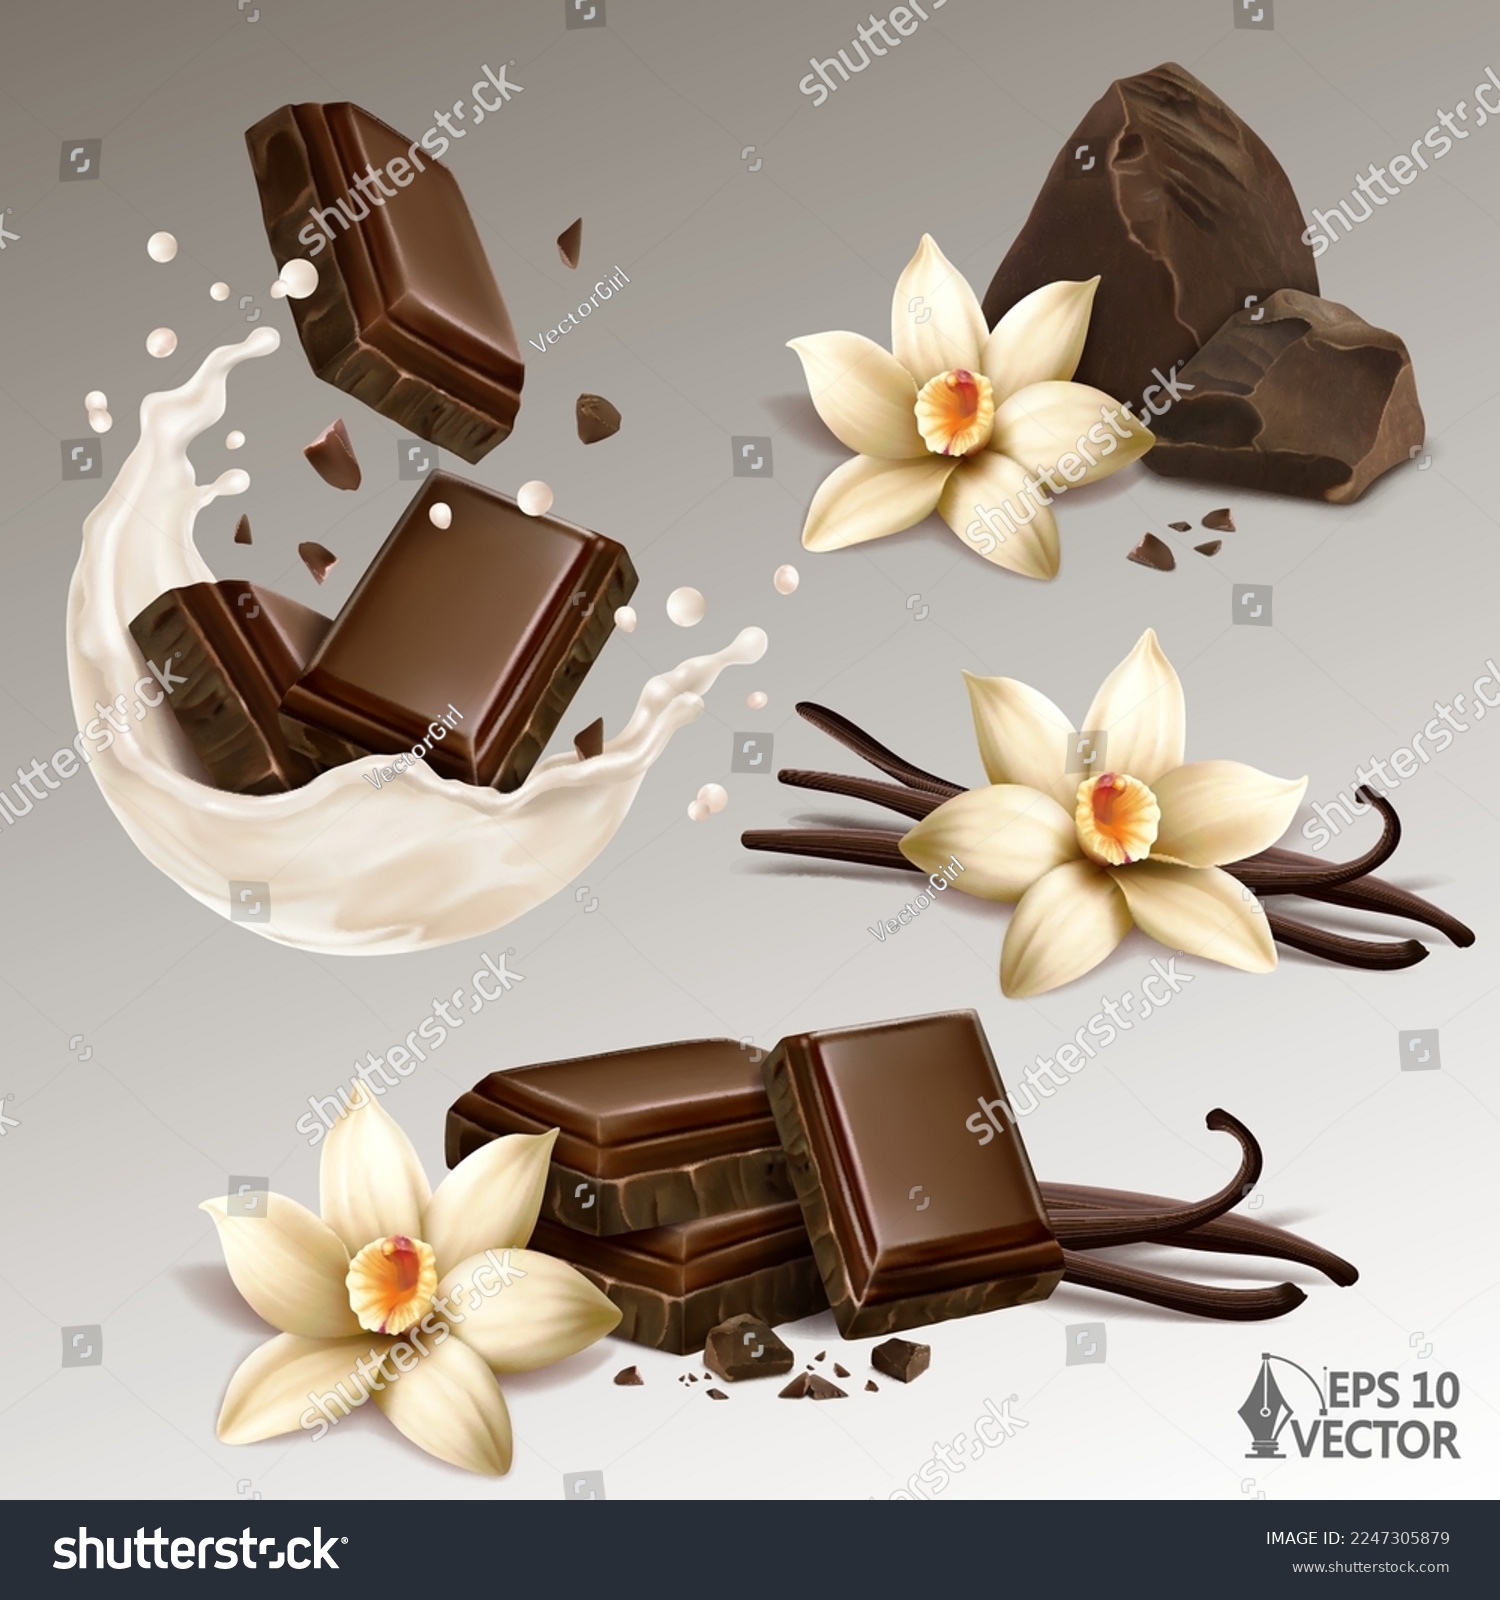 SVG of Realistic set of natural vanilla flowers and sticks, chocolate slices and crumbs in a milk or yogurt splash, 3d vector illustration svg